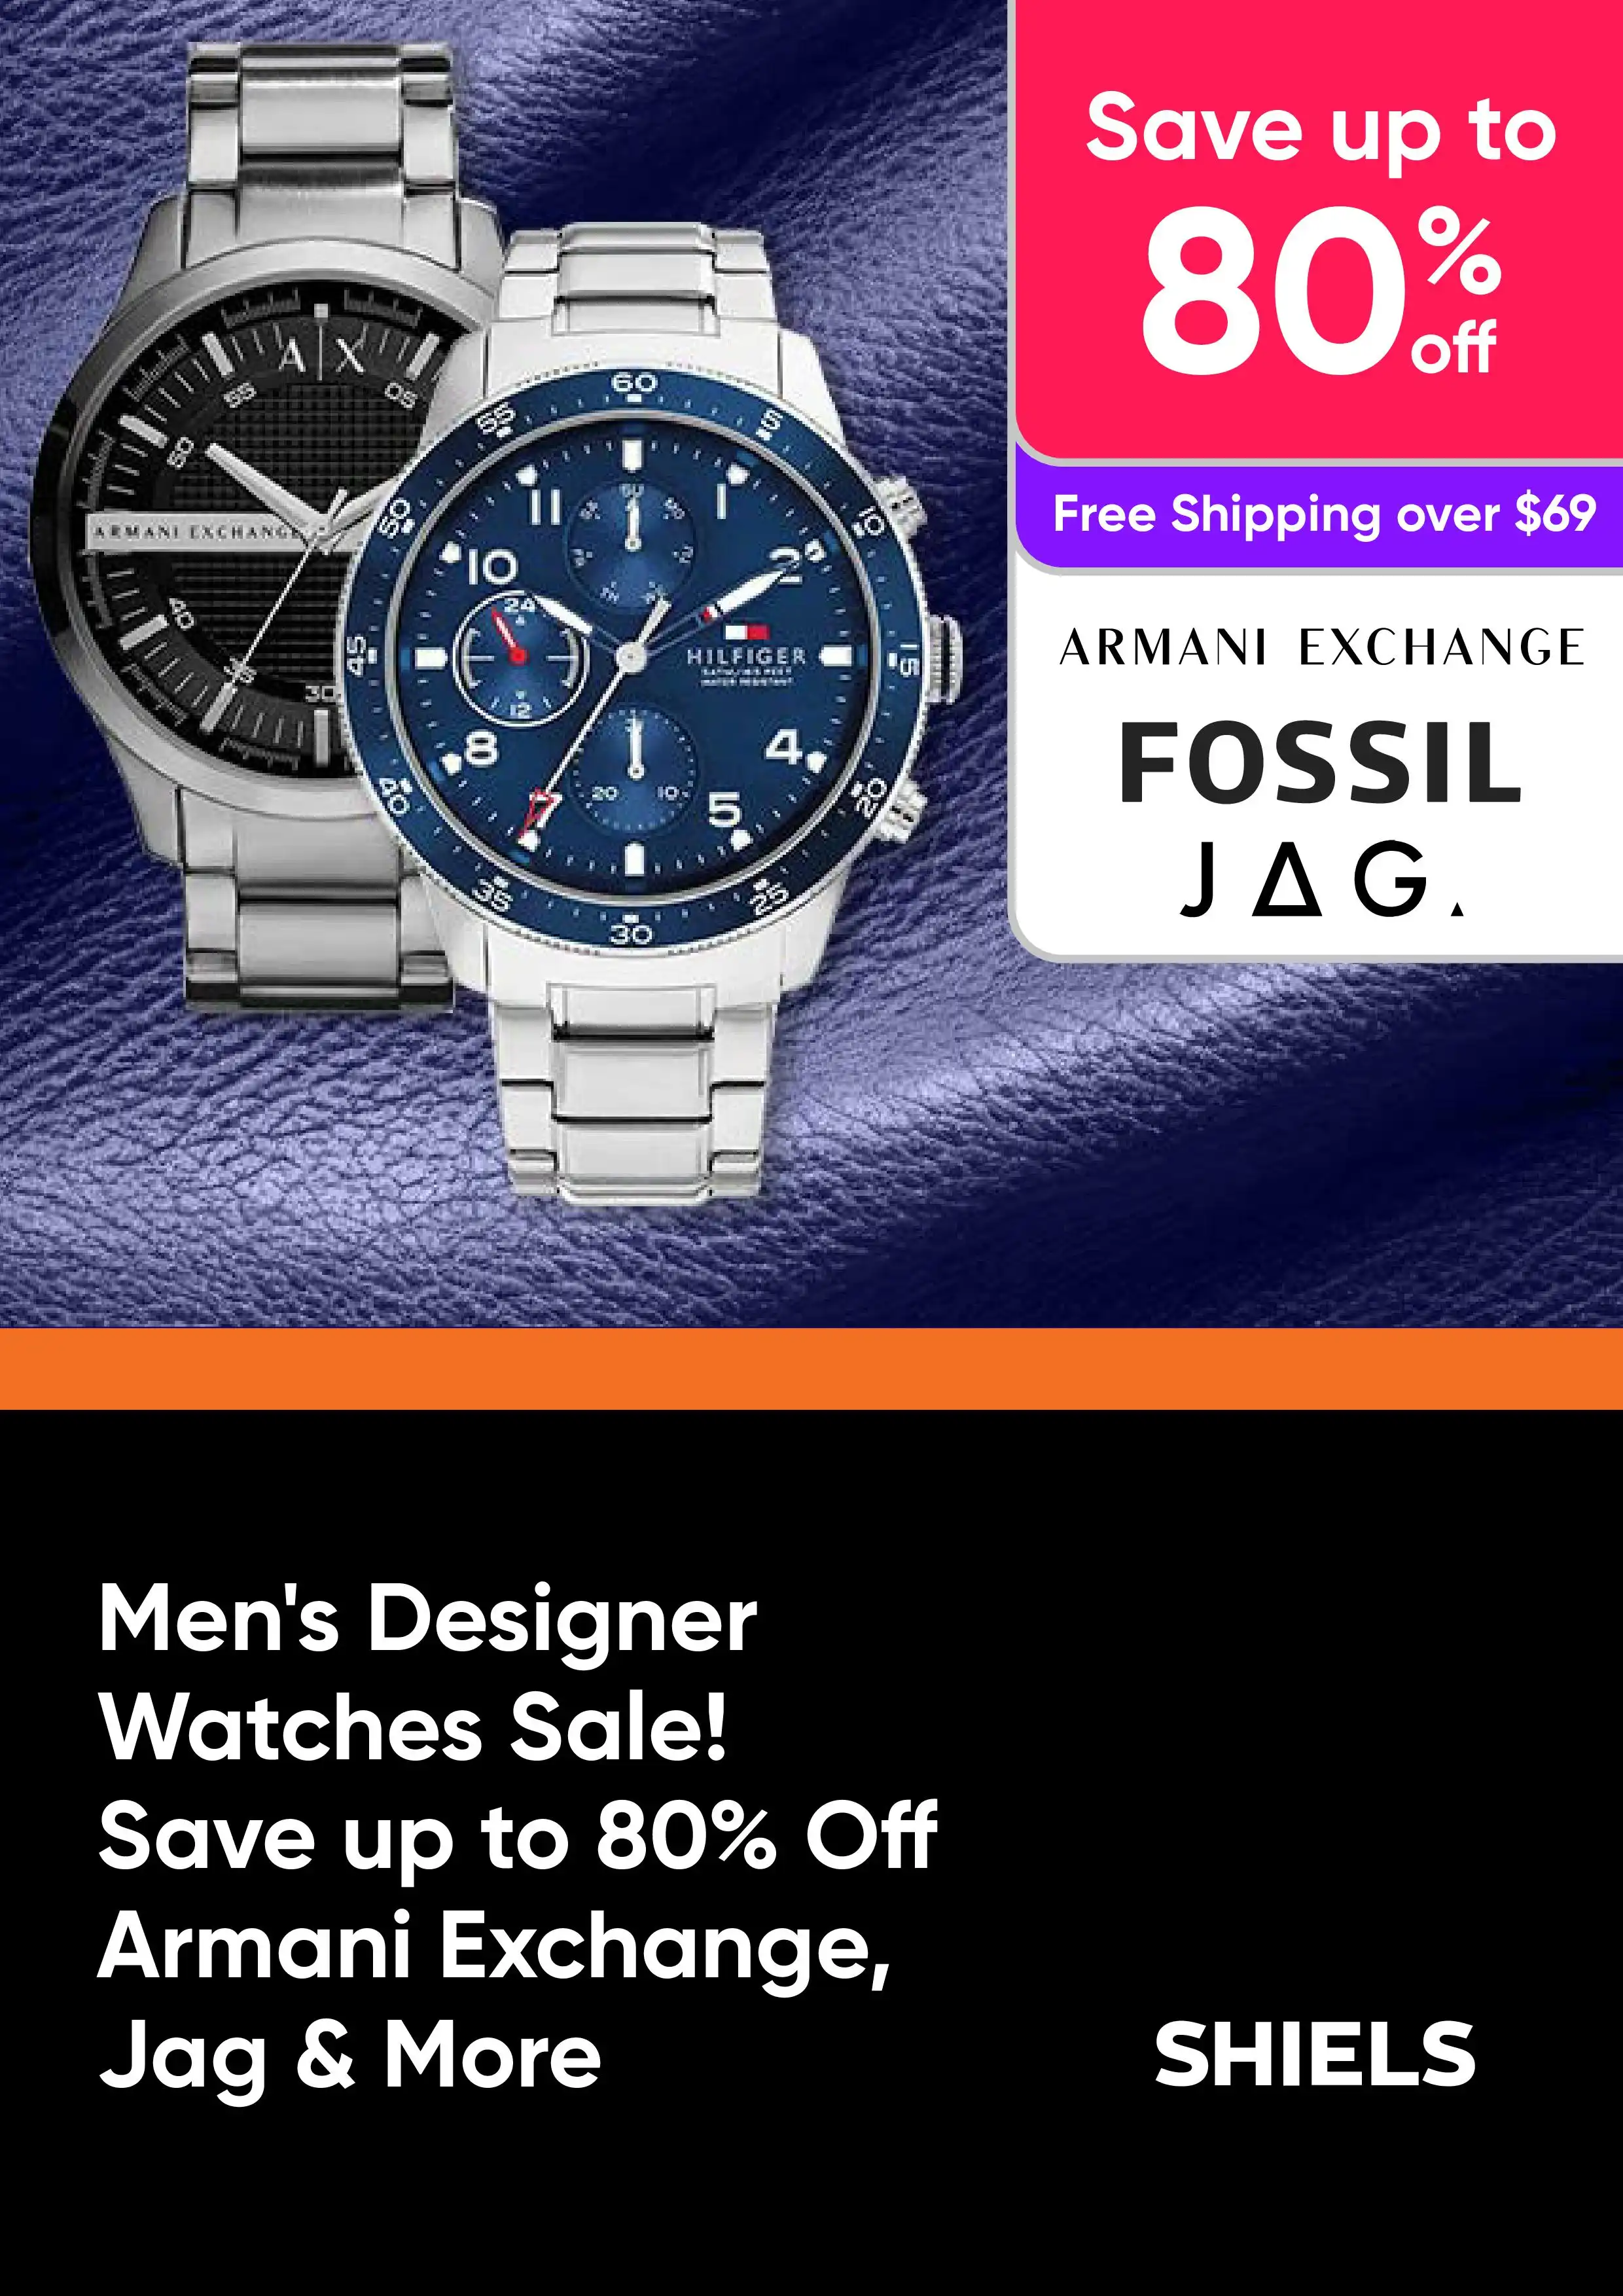 Men's Designer Watches Sale! Save up to 80% Off Armani Exchange, Jag & more